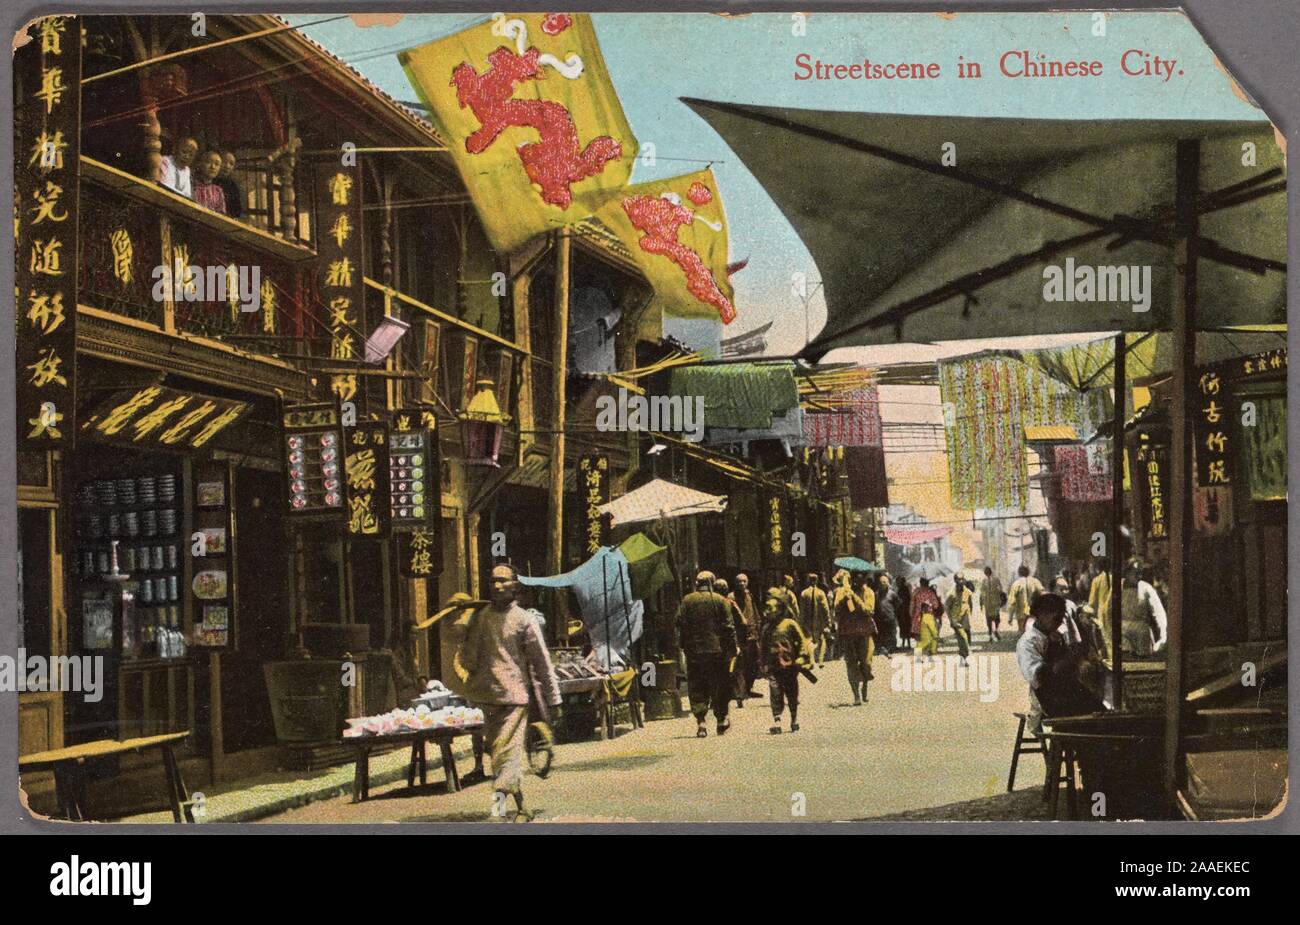 Illustrated postcard of a busy commercial street with colorful storefronts, banners and canopies in Shanghai, China, published by Chrom, 1912. Edit. Kingshill. From the New York Public Library. () Stock Photo